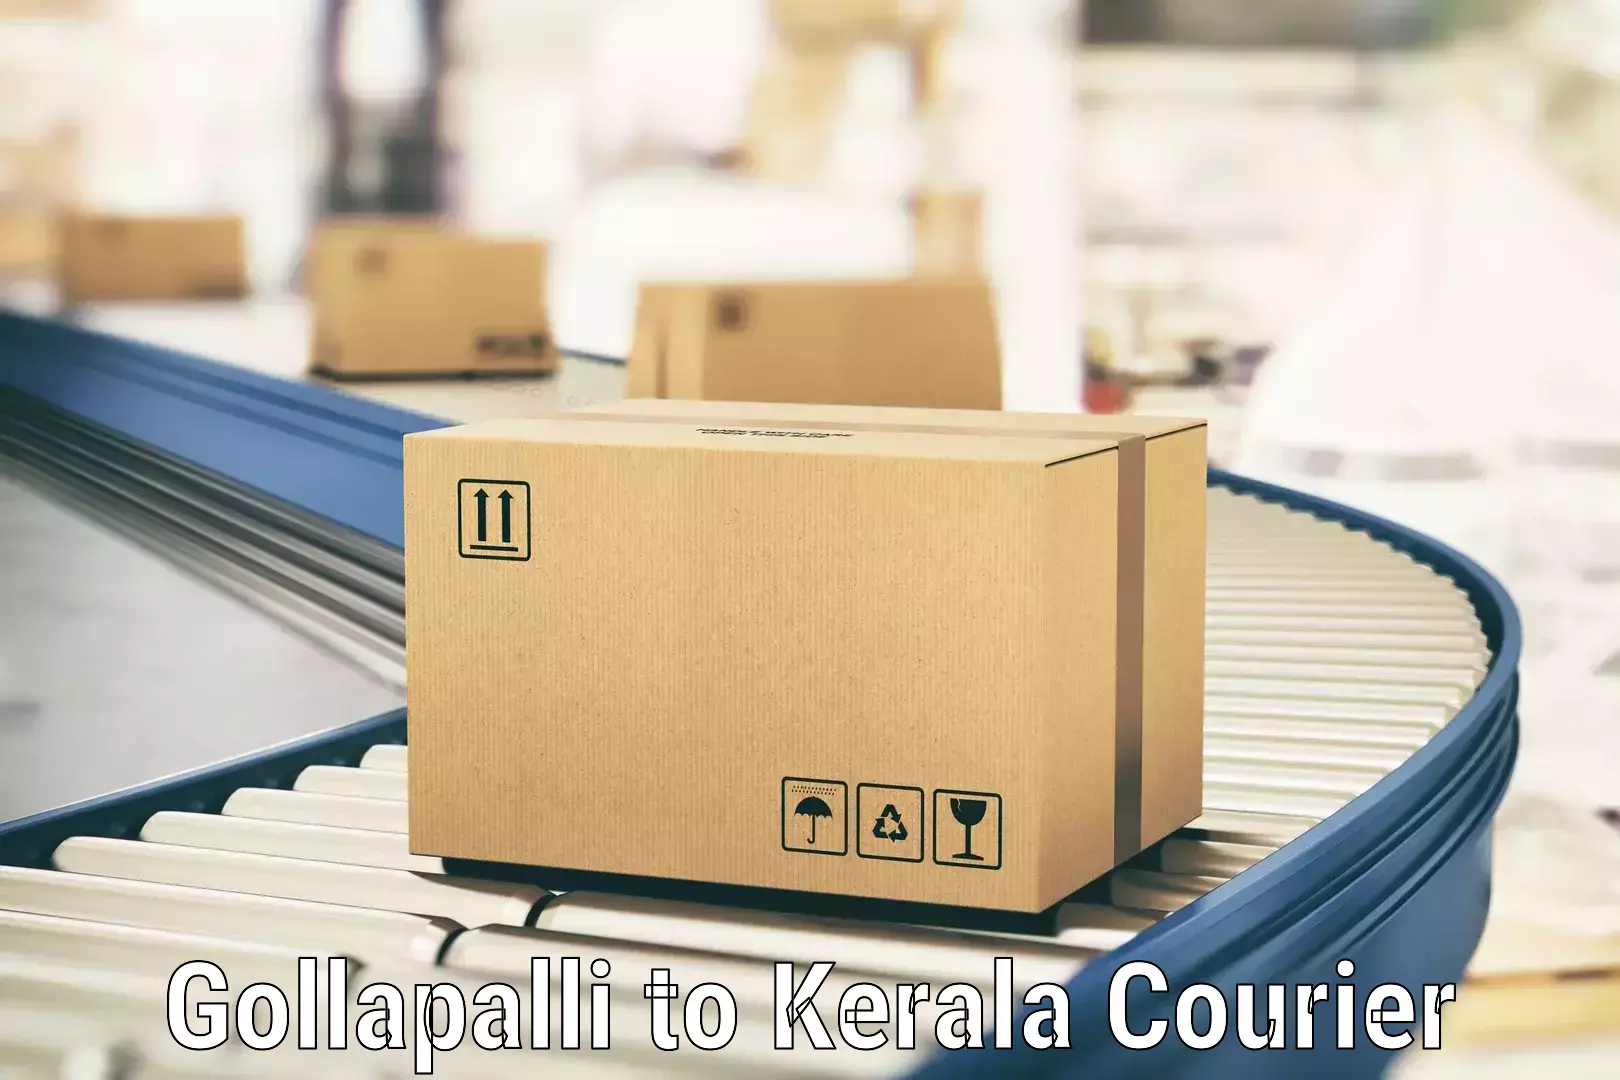 Global courier networks Gollapalli to Munnar